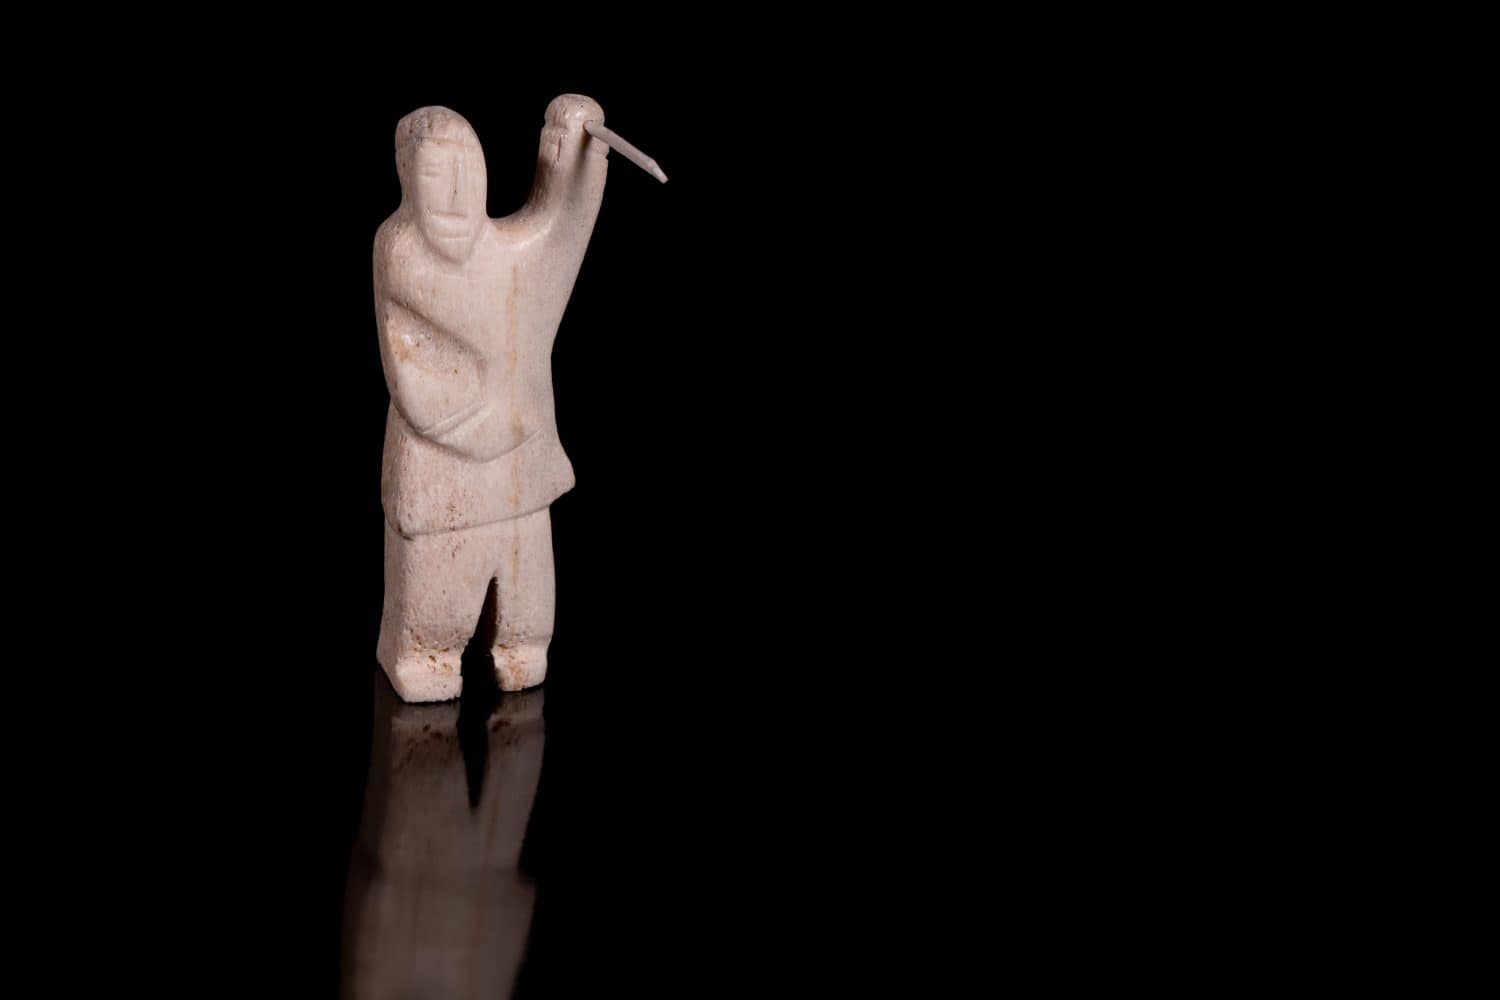 Small statue of Inuit hunter with a spear made of animal bone. Isolated on black background. Inuit art.